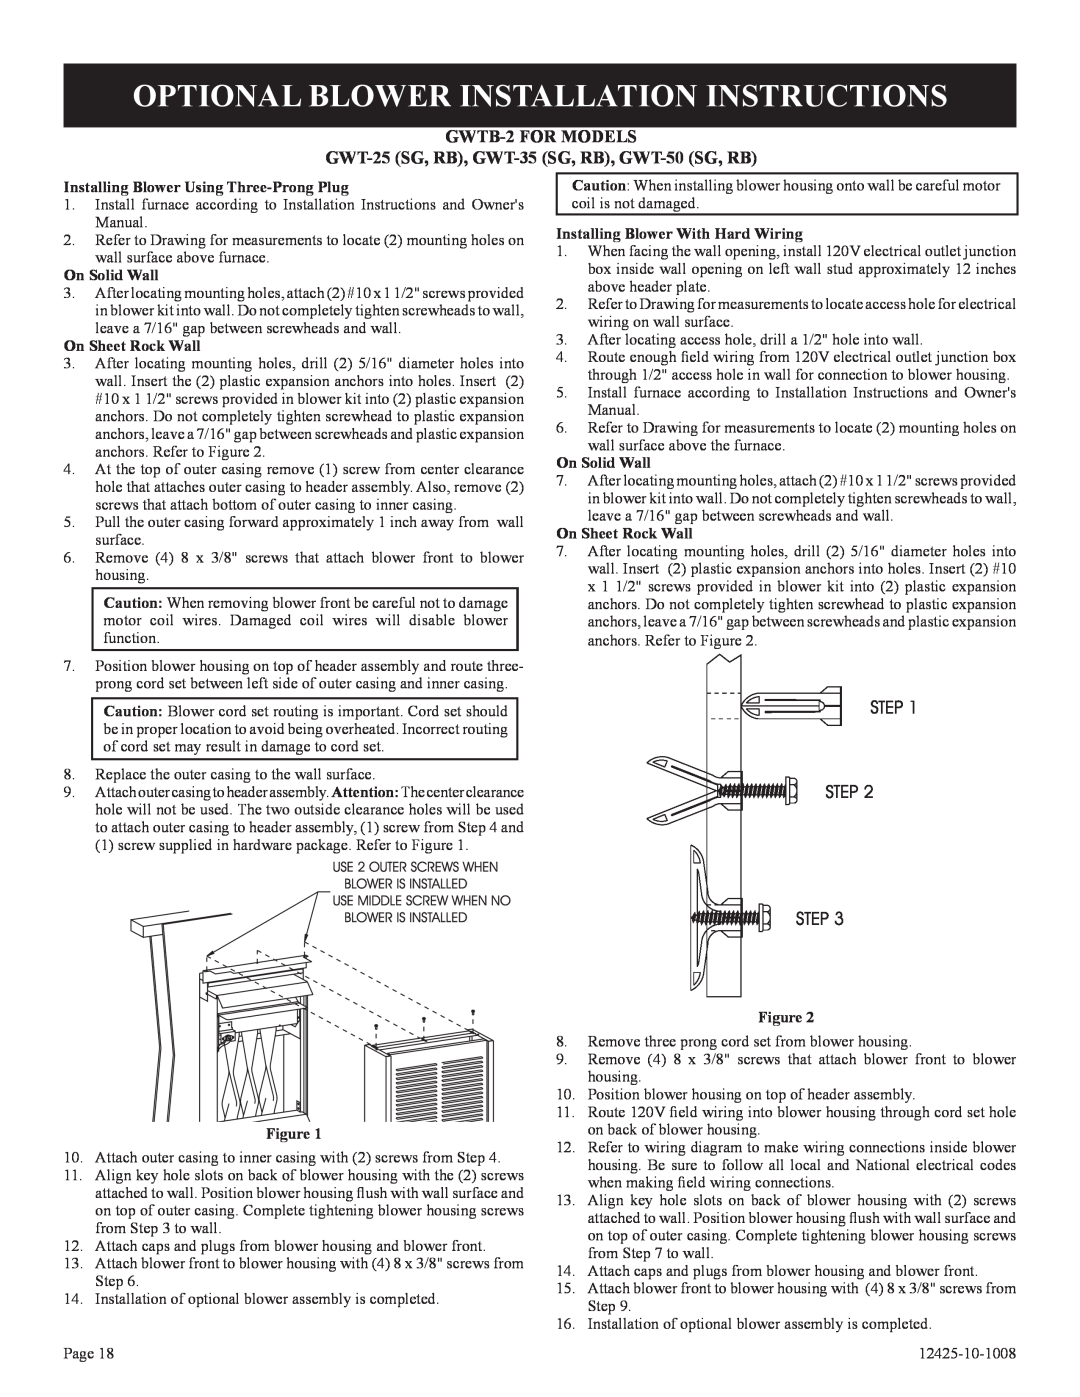 Empire Products GWT-25-2(SG Optional Blower Installation Instructions, Installing Blower Using Three-ProngPlug 